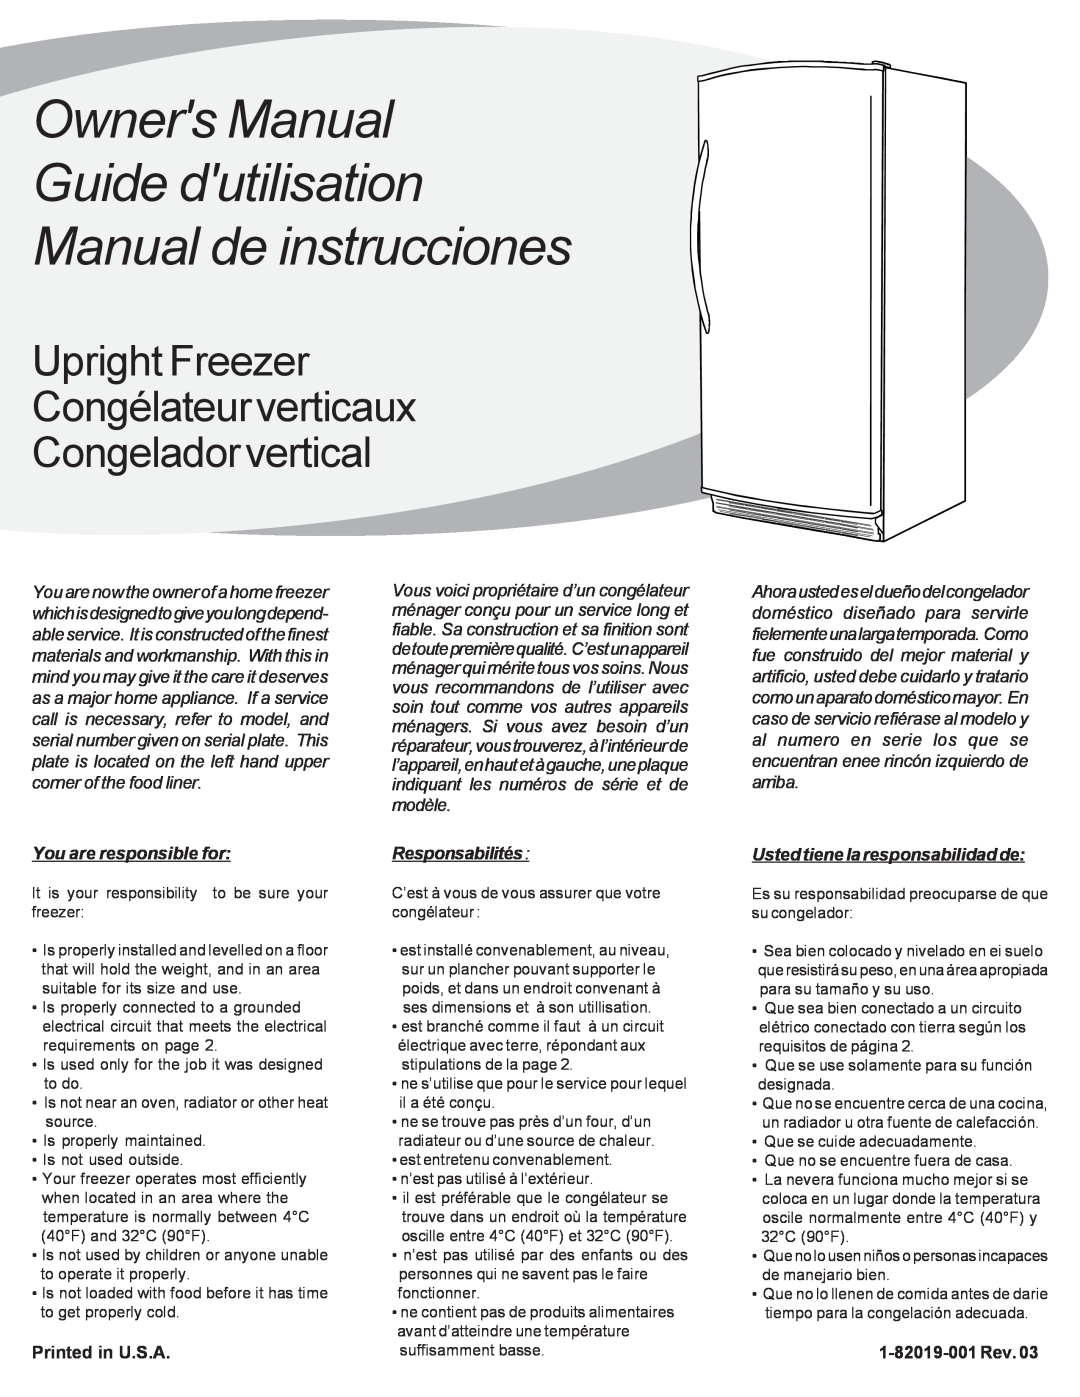 Danby DUF1166W owner manual Upright Freezer Congélateurverticaux, Congeladorvertical, You are responsible for 